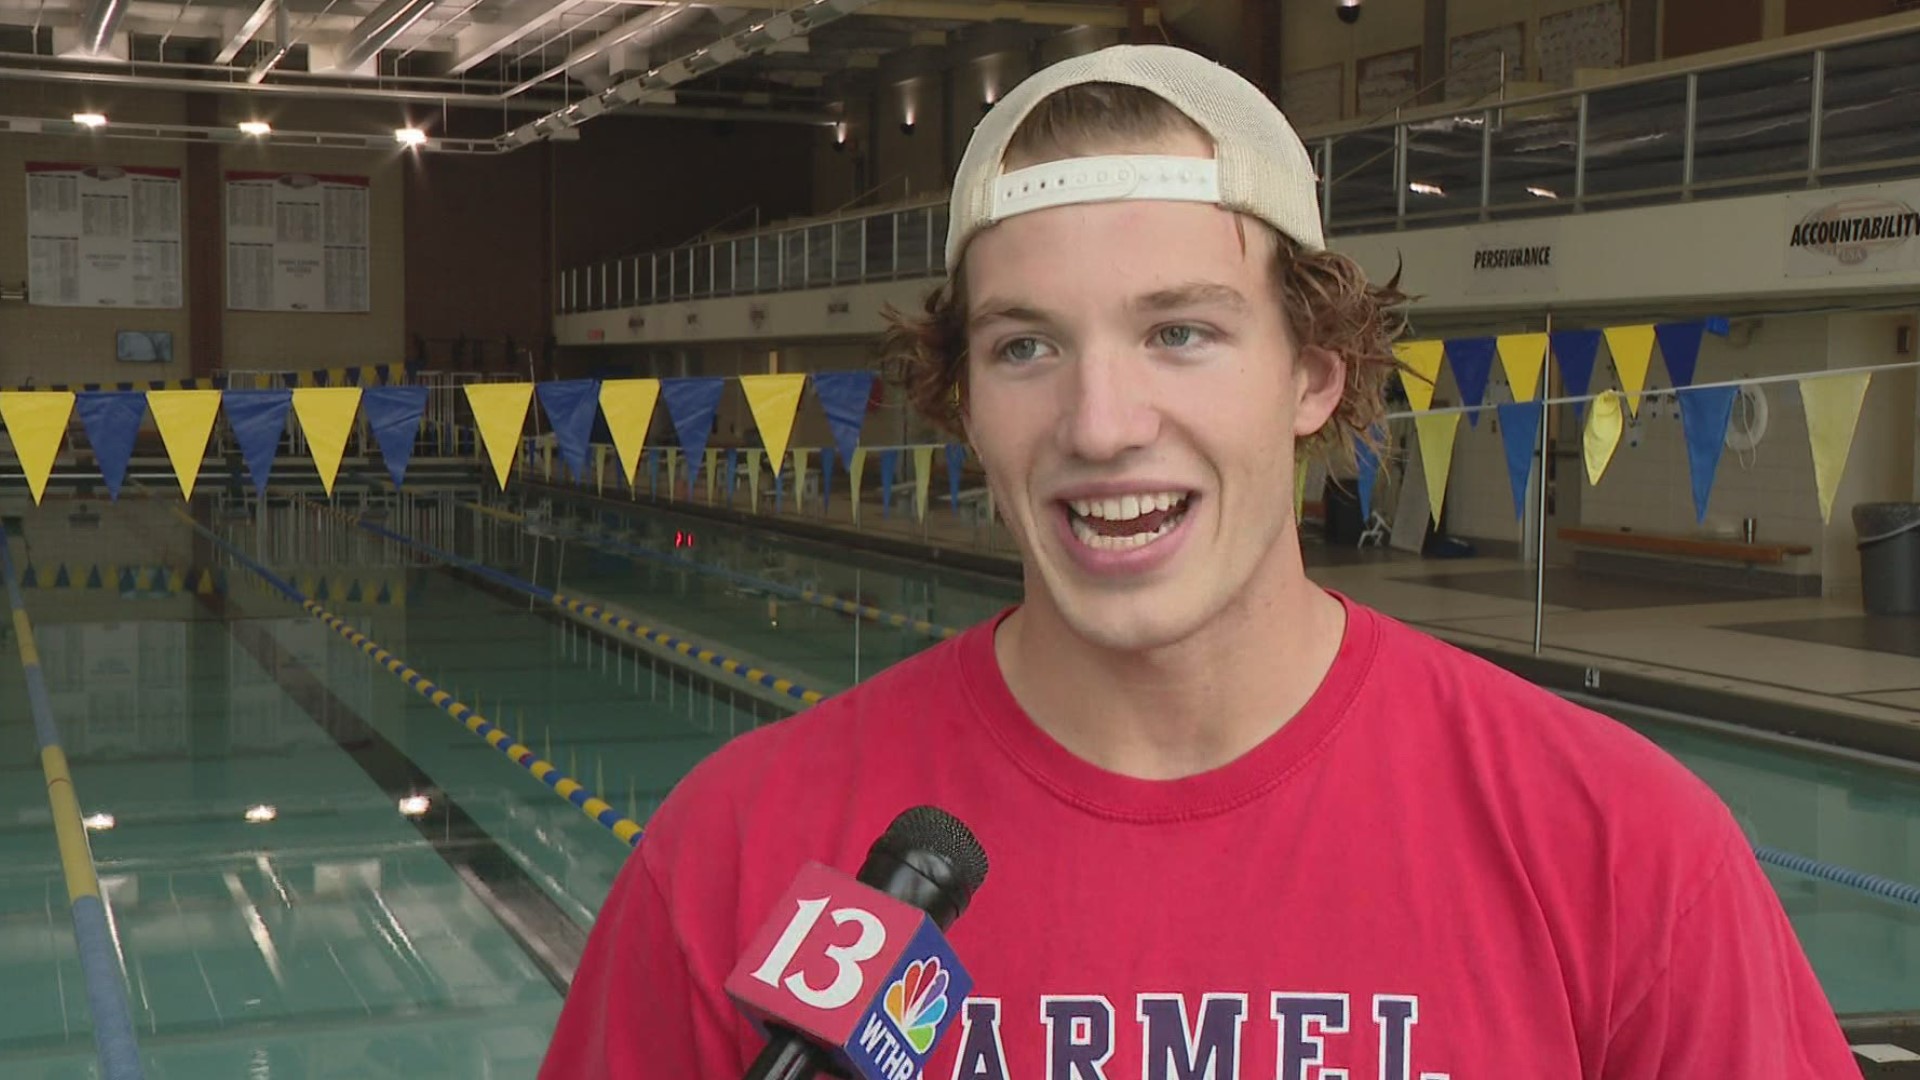 Despite the dominance, Carmel never had an Olympic competitor - until now.